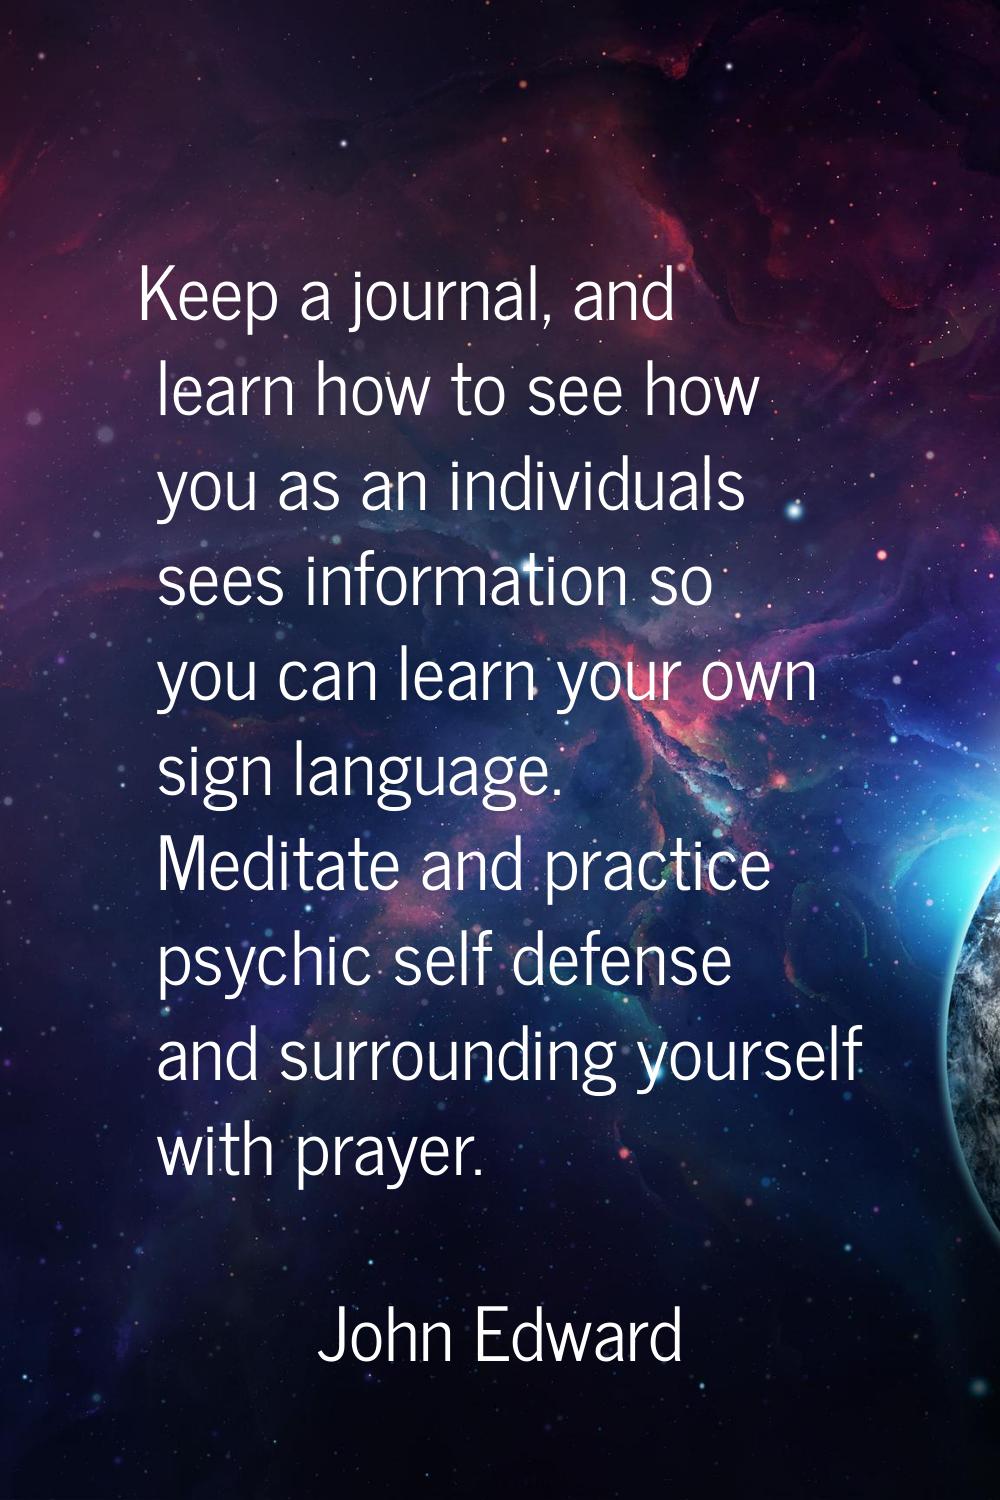 Keep a journal, and learn how to see how you as an individuals sees information so you can learn yo